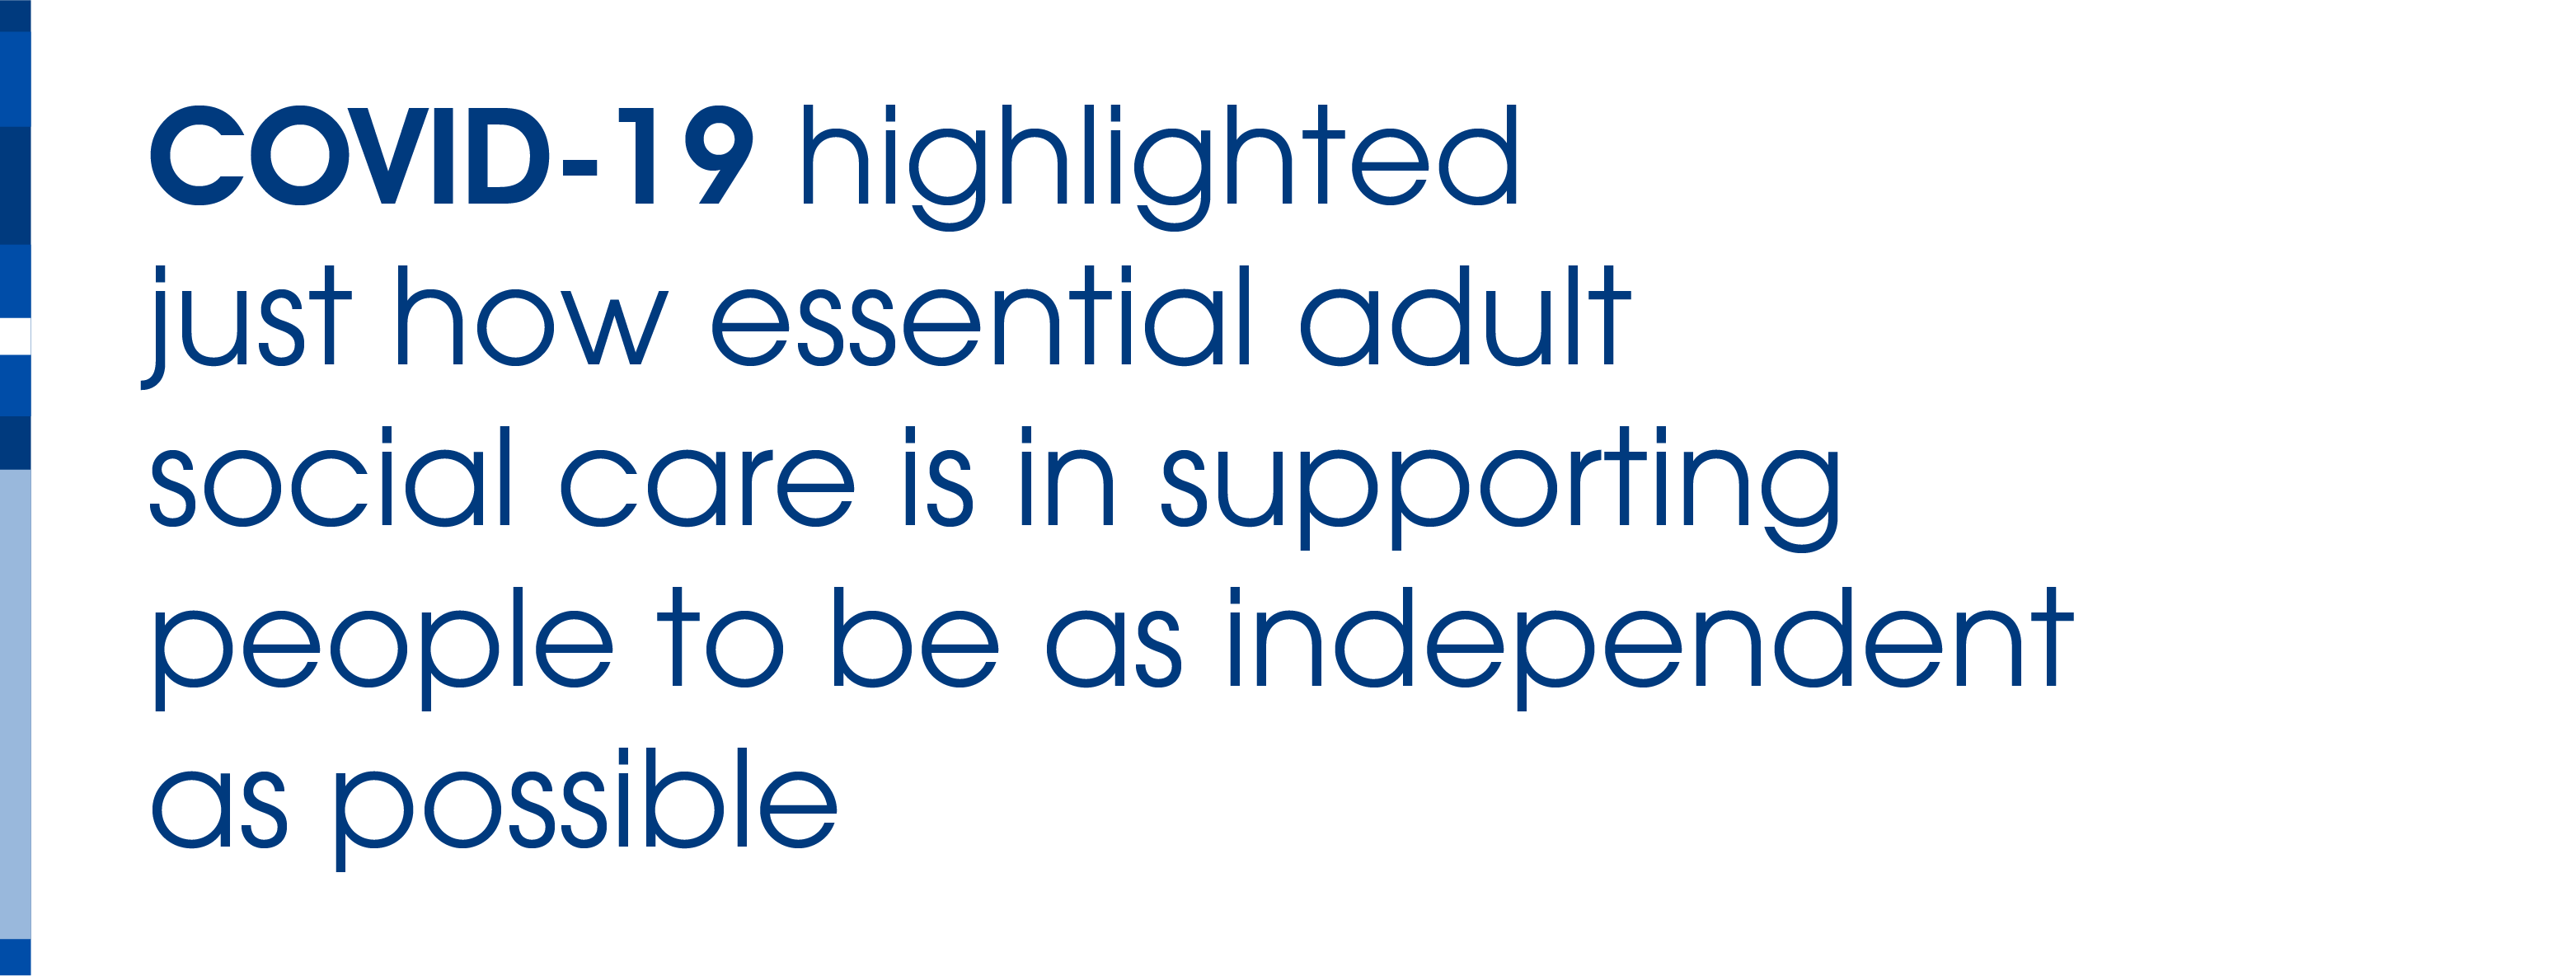 COVID-19 highlighted just how essential adult social care is in supporting people to be as independent as possible